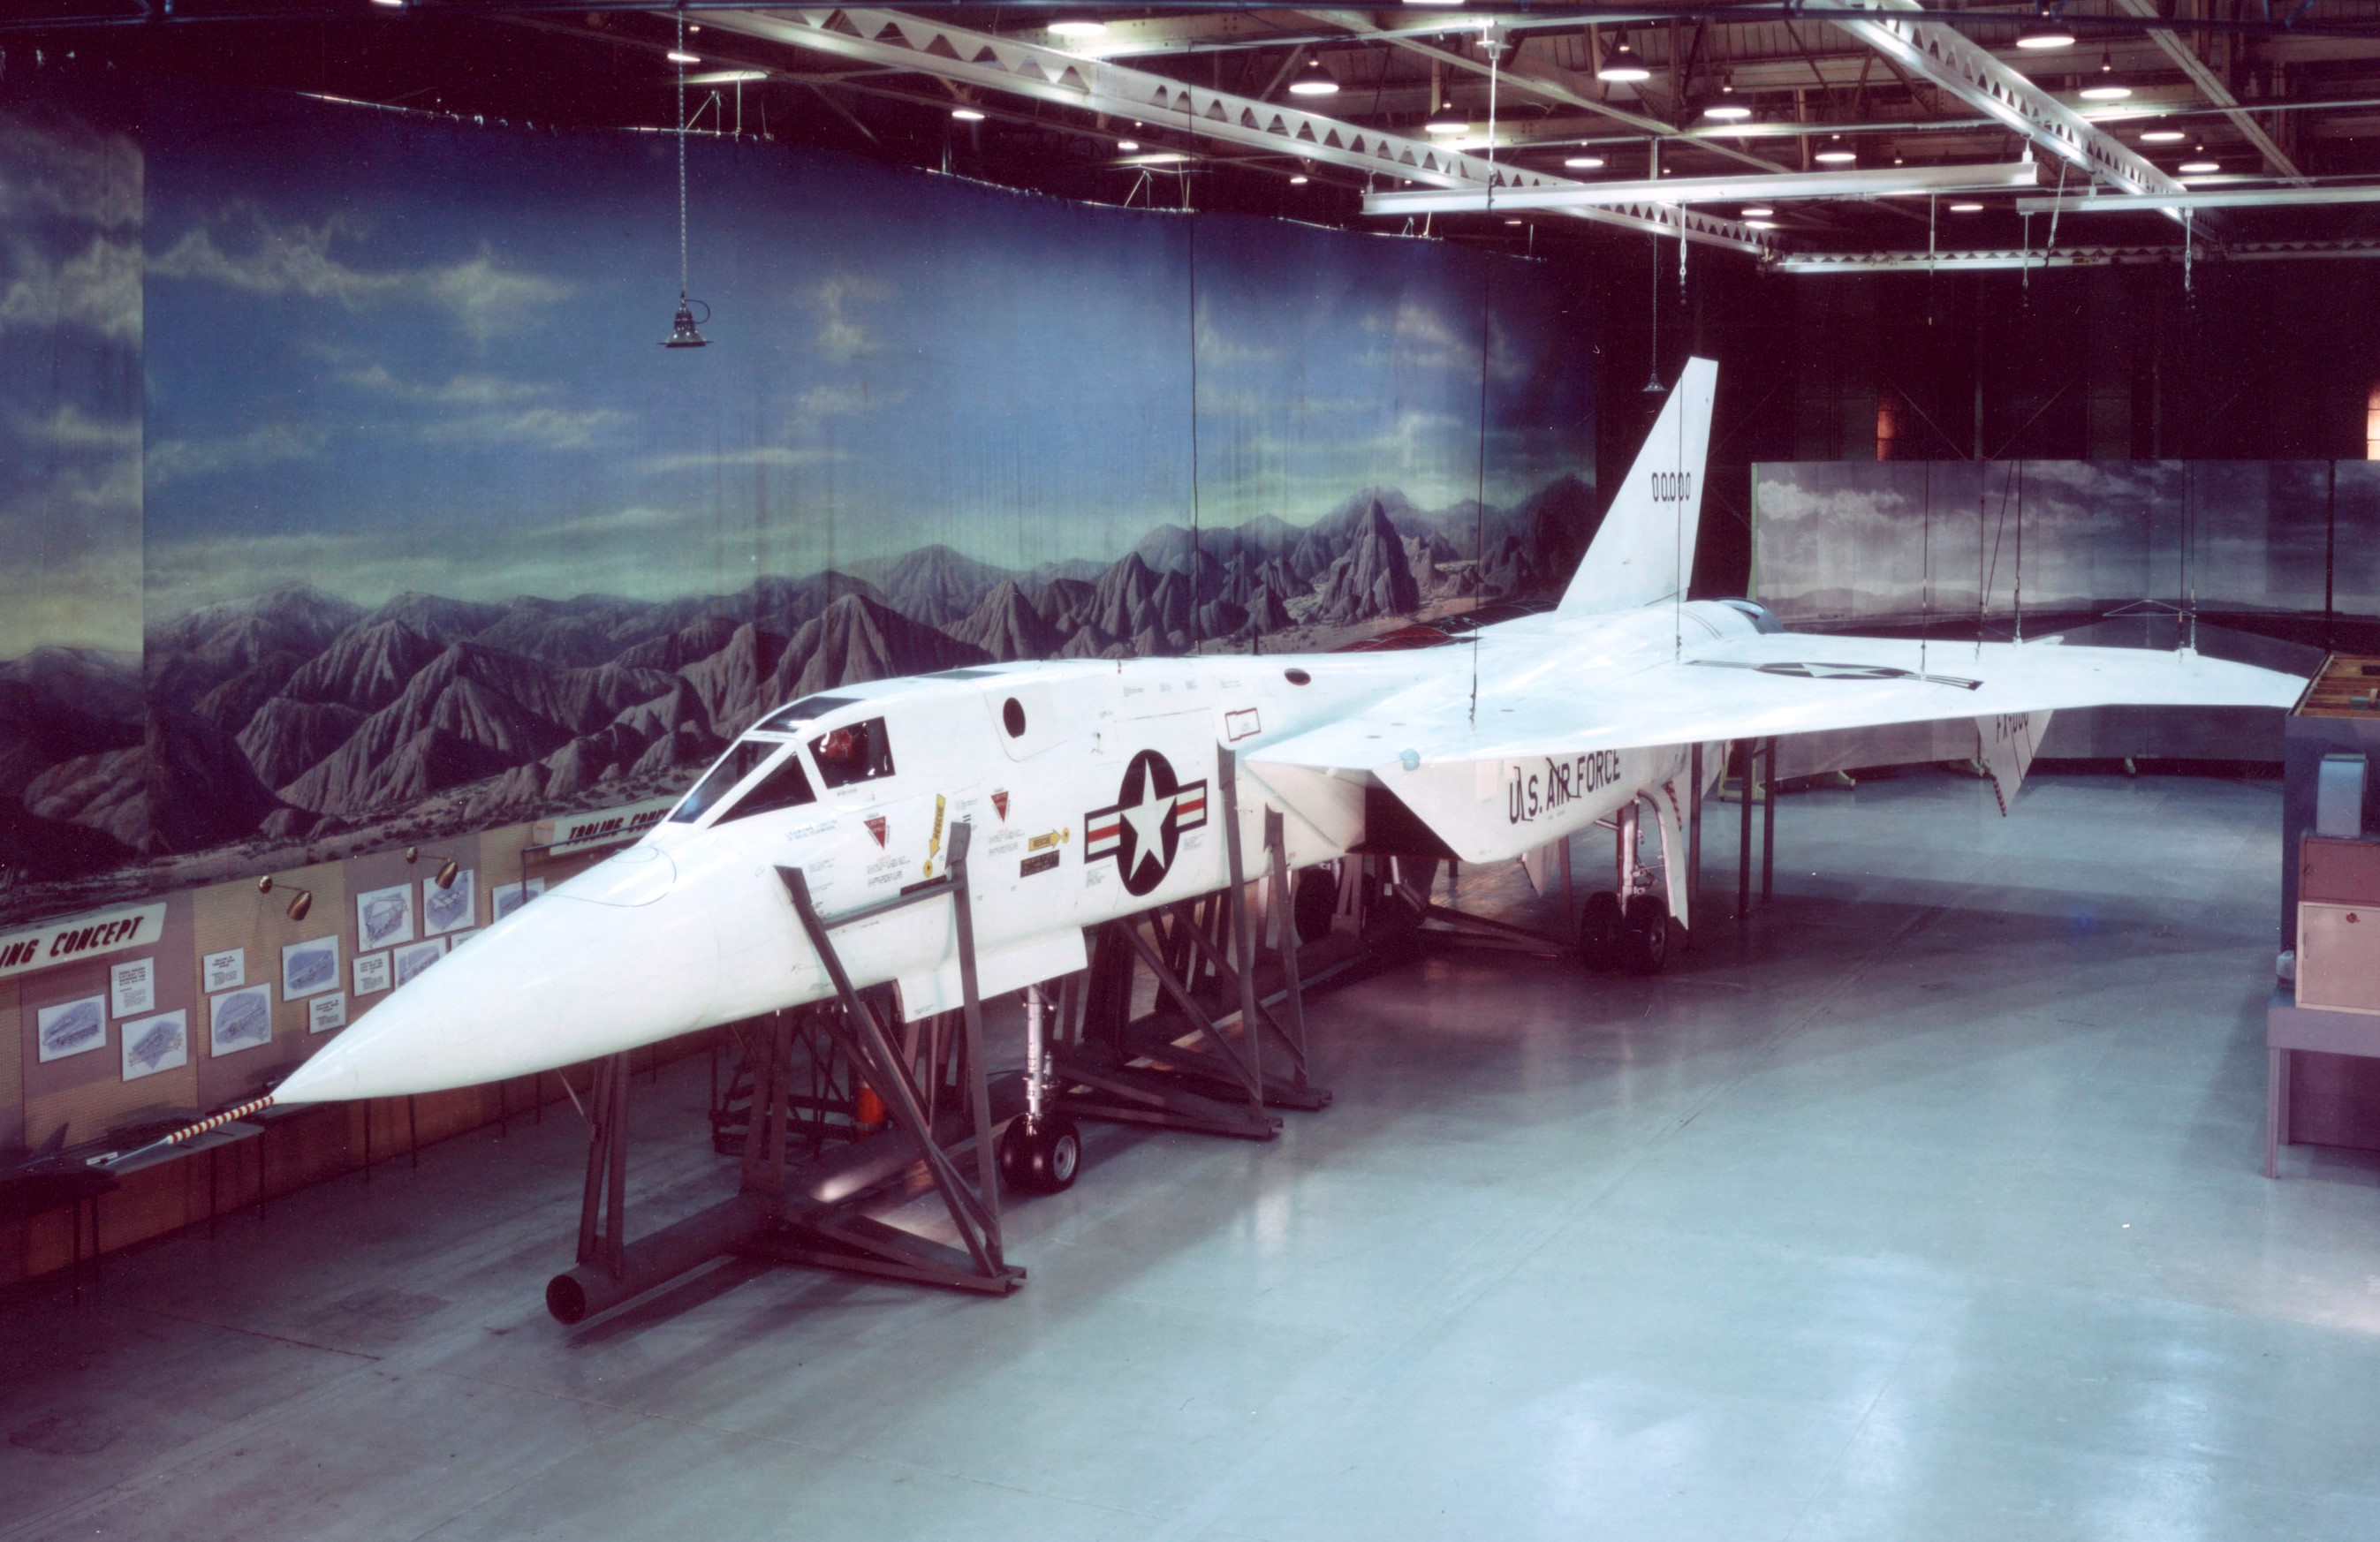 North American F-108A mockup prior to the Air Force inspection